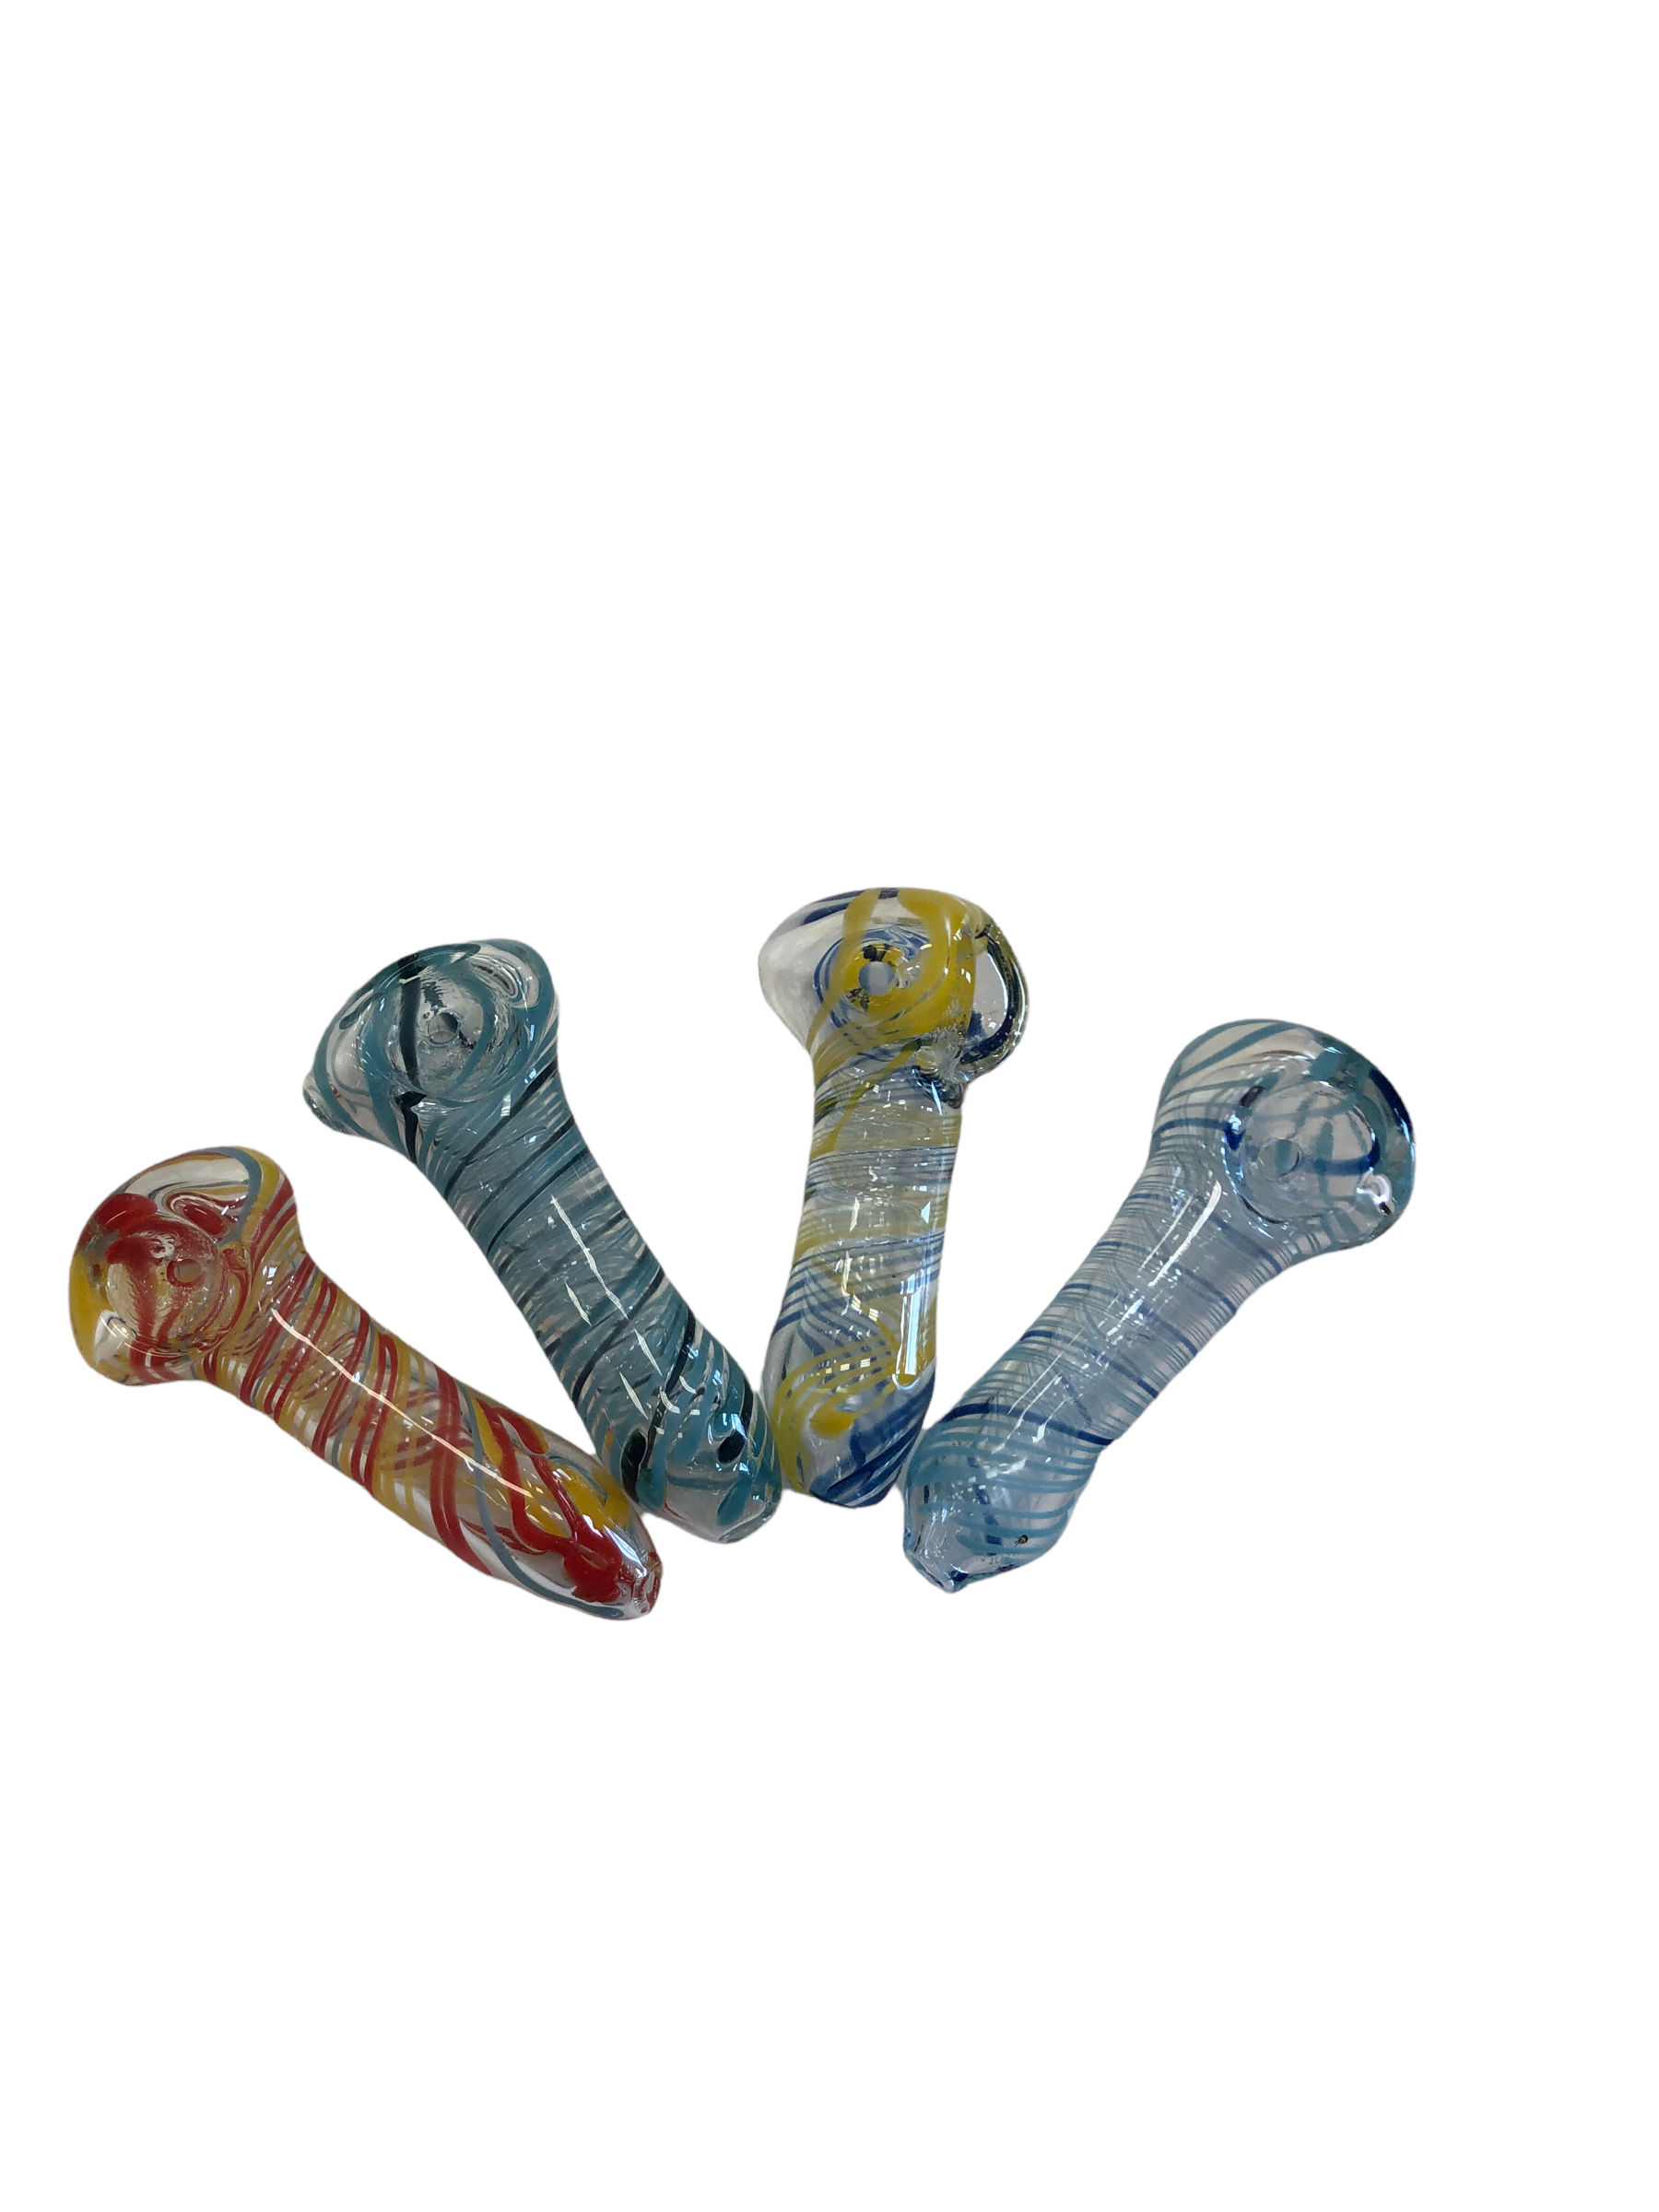 IN-OUT | 2.5" GLASS PIPE JAR 90 PCS